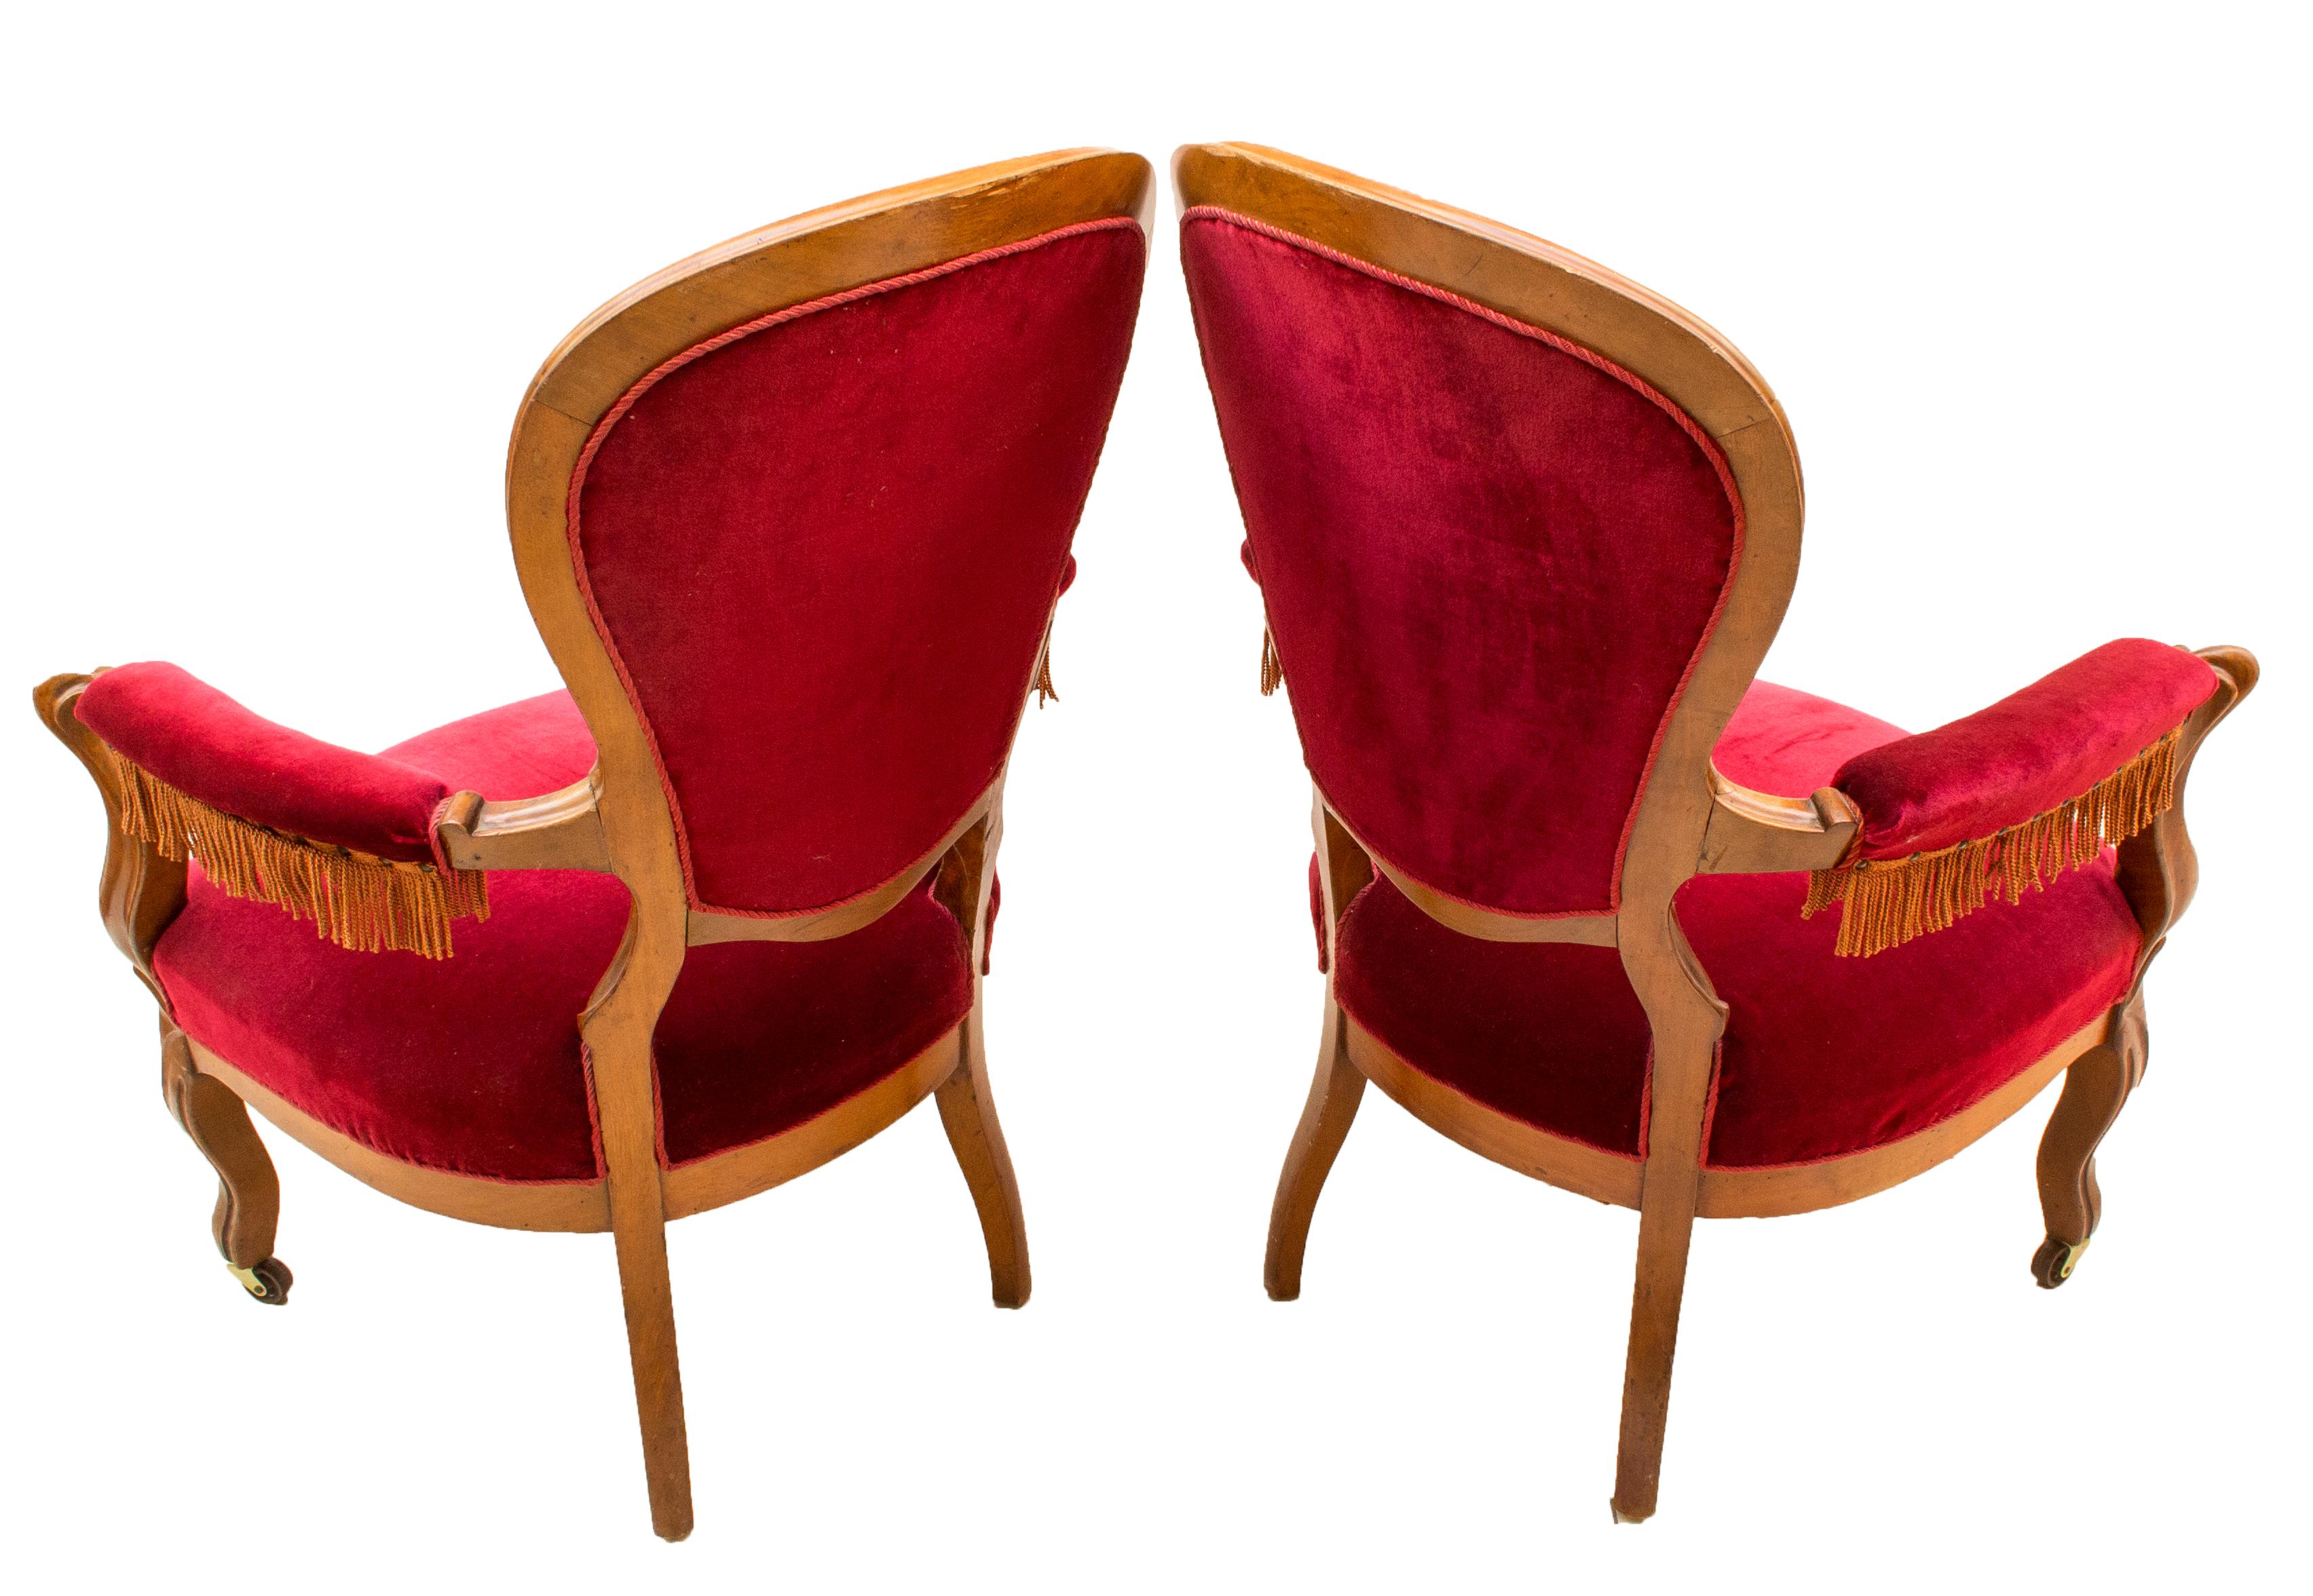 The two armchairs original upholstery. The chairs are made of solid mahogany wood and from the time of Louis Philippe, circa 1860. Chairs are firm, do not wiggle. The chairs weren't restored by us. 